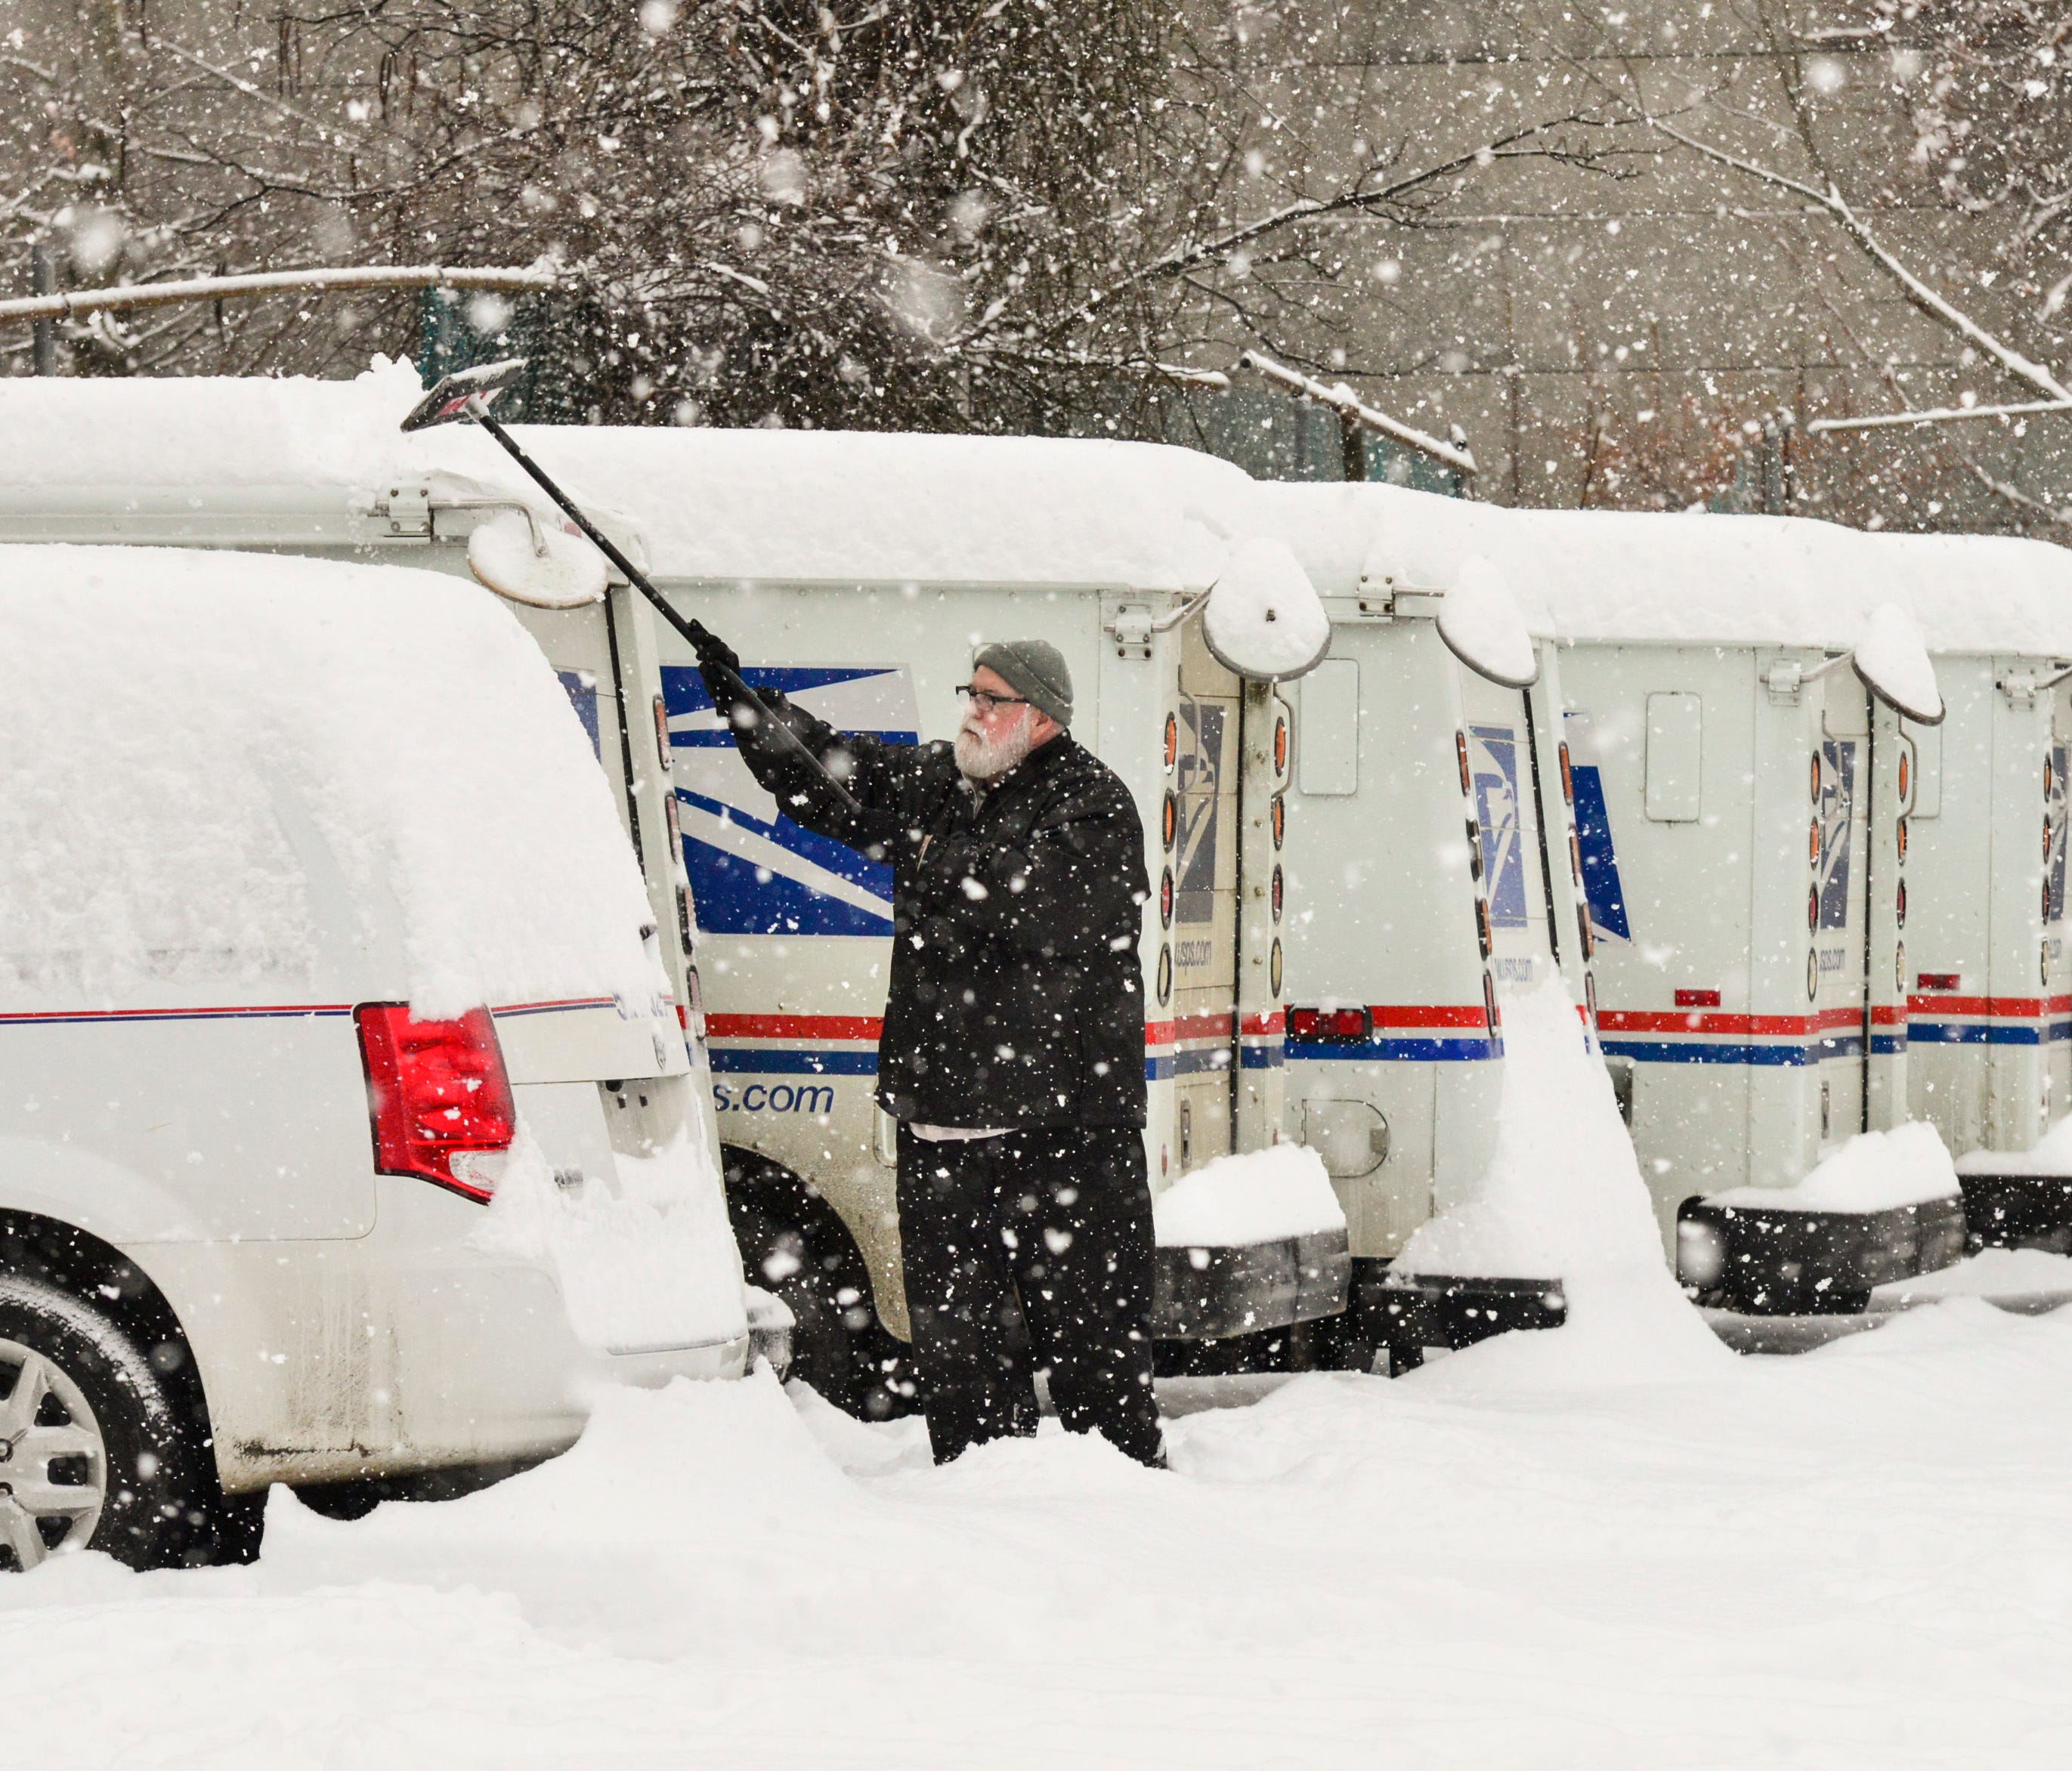 Philip Fitzwater, a city carrier assistant for the United States Postal Service, in Brattleboro, Vt., removes the snow off his vehicle before heading out on his route Monday, Dec. 12, 2016.  More snow is forecast for New England this week.